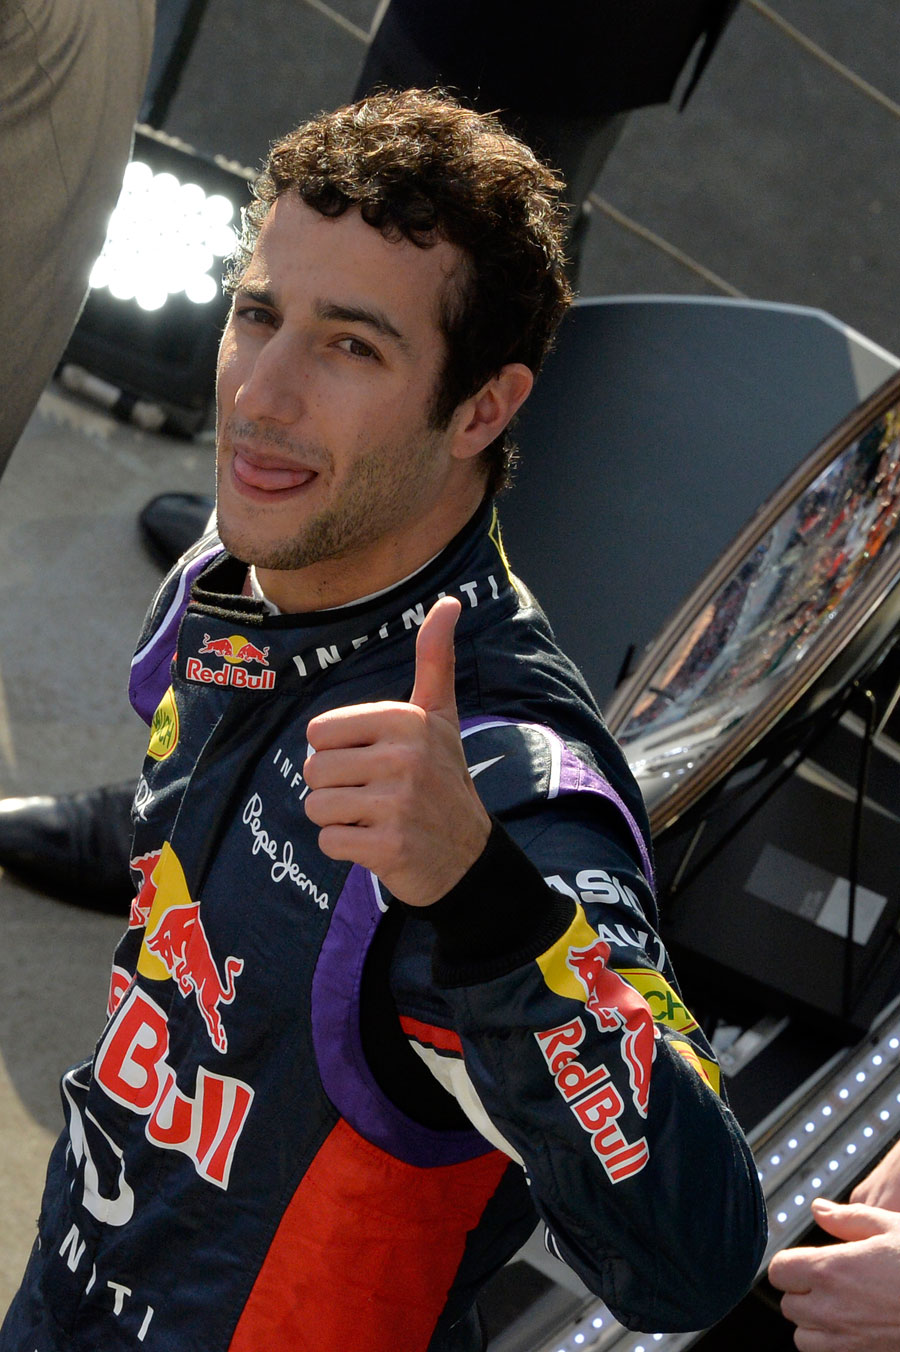 Thumbs up from Daniel Ricciardo as he leaves the podium